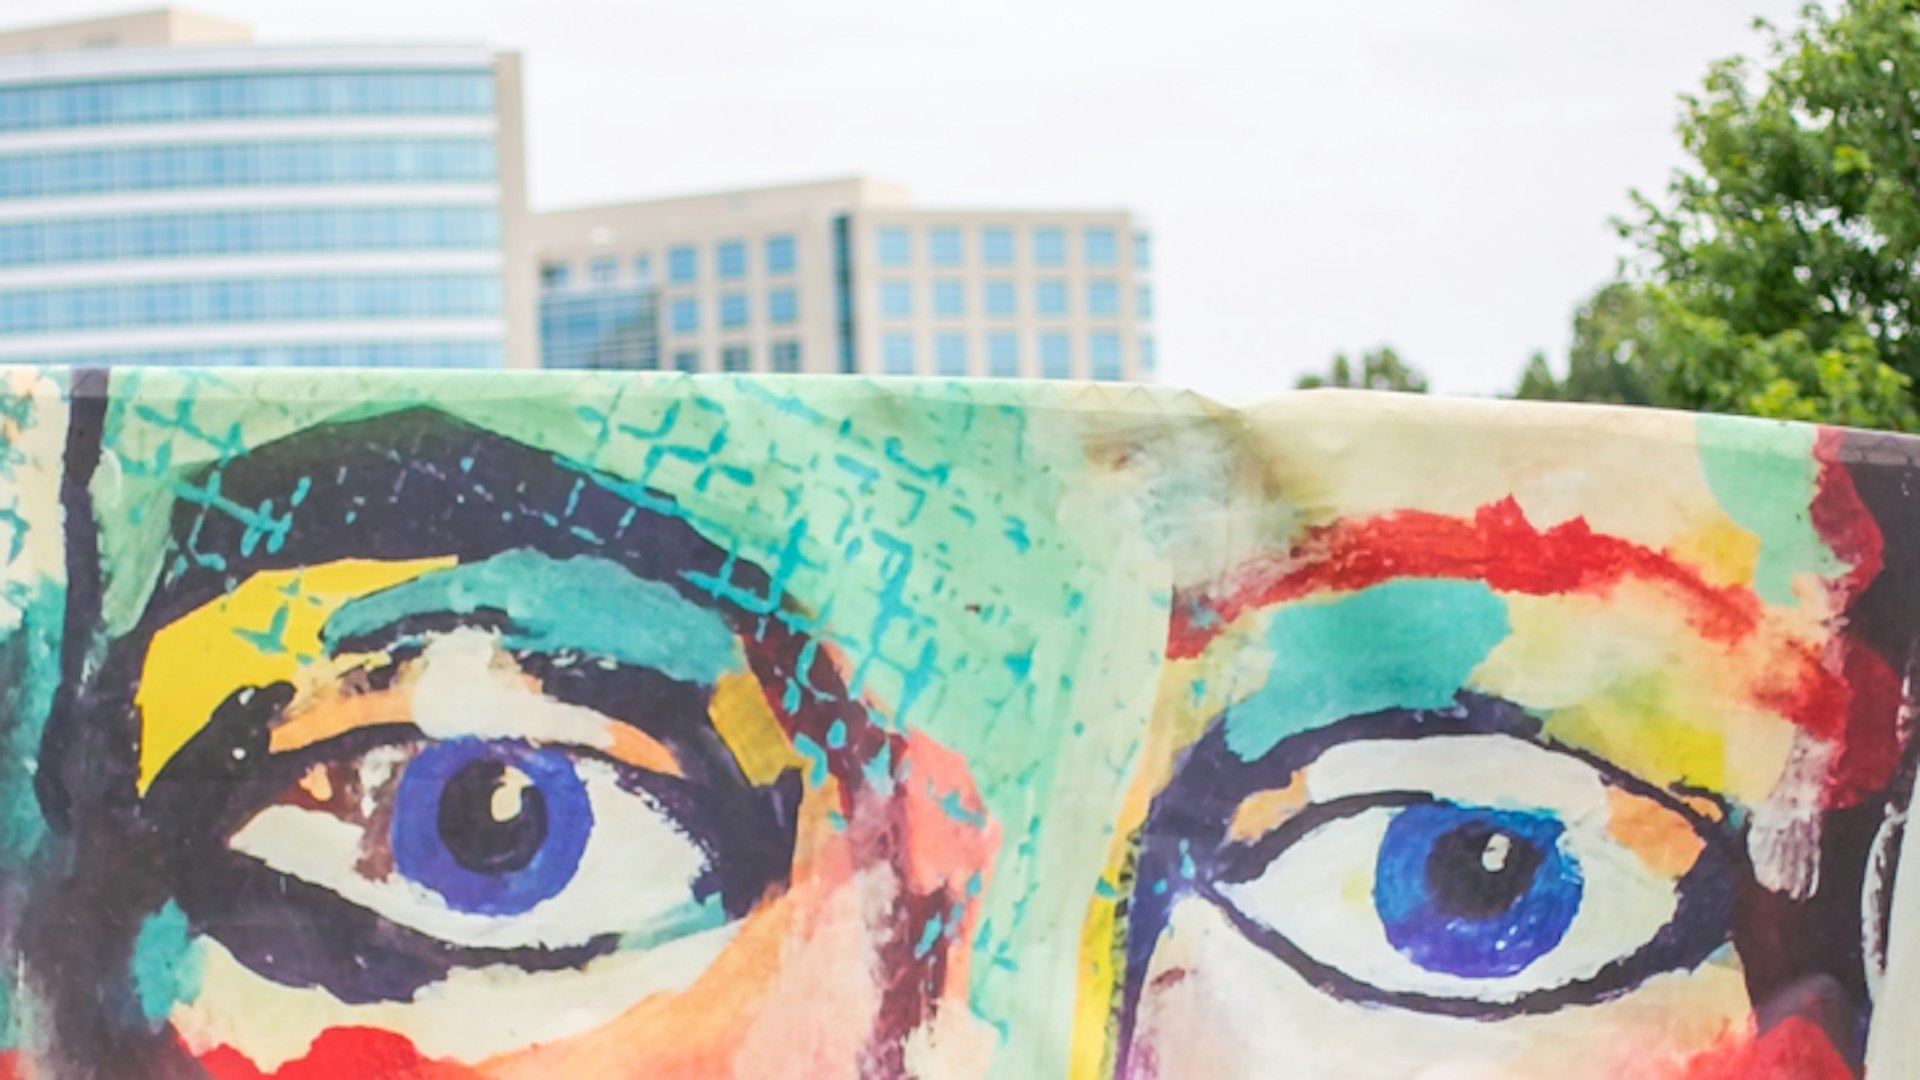 Printed mural on construction fencing depicts a colorful face with large eyes.